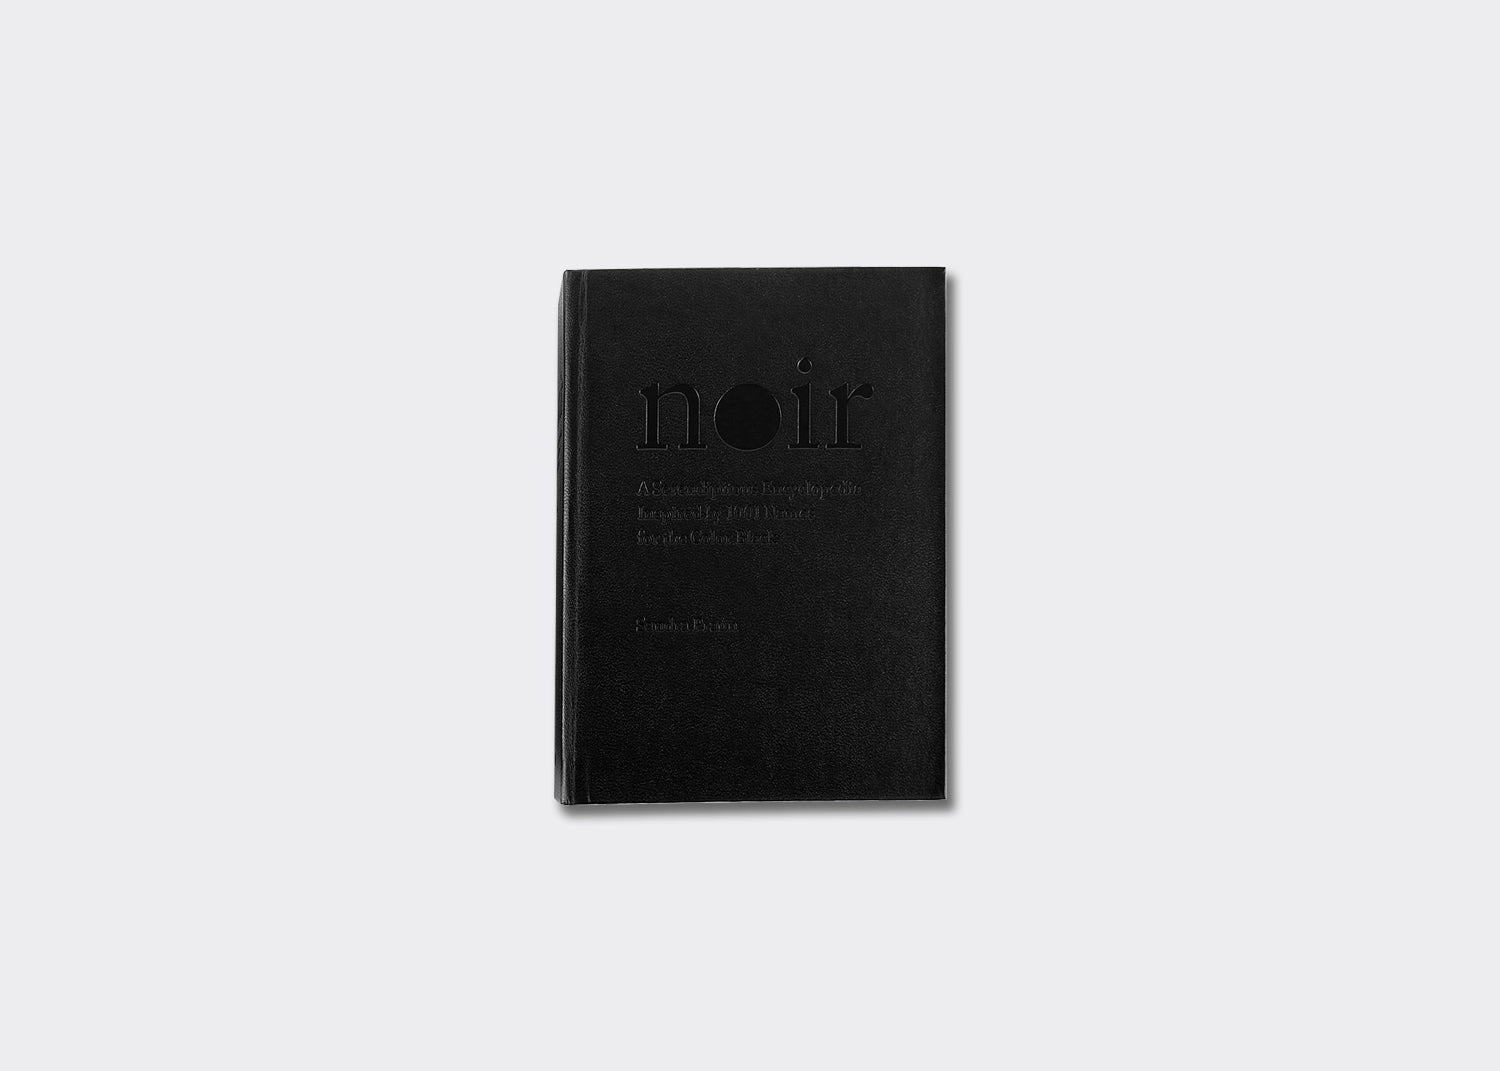 Noir – A Serendipitous Encyclopedia Inspired by 1001 Names for the Color Black